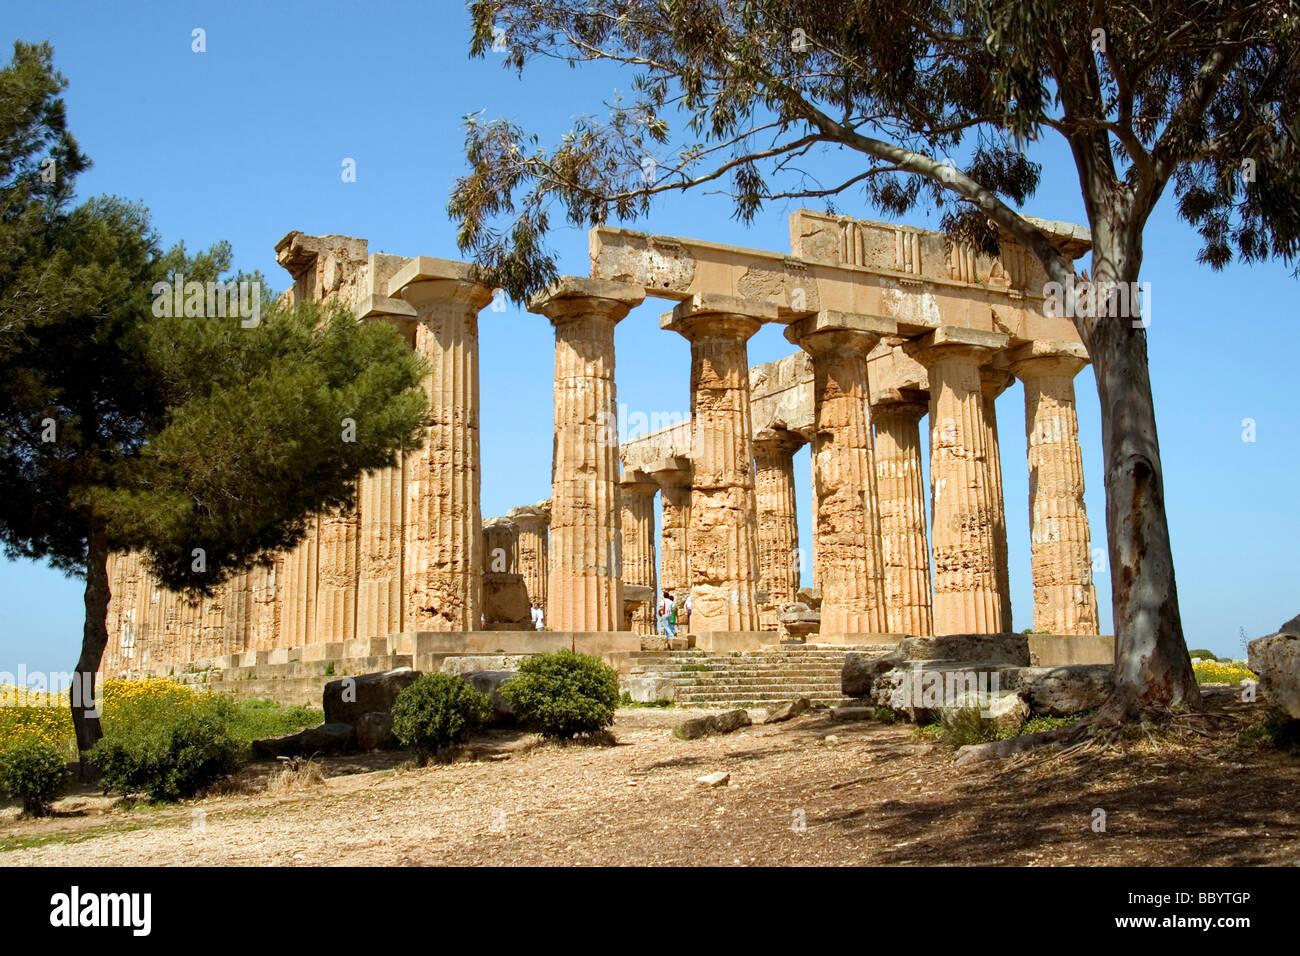 Ancient Greek Temple, archaeological site, Selinunte, Sicily, Italy, Europe Stock Photo